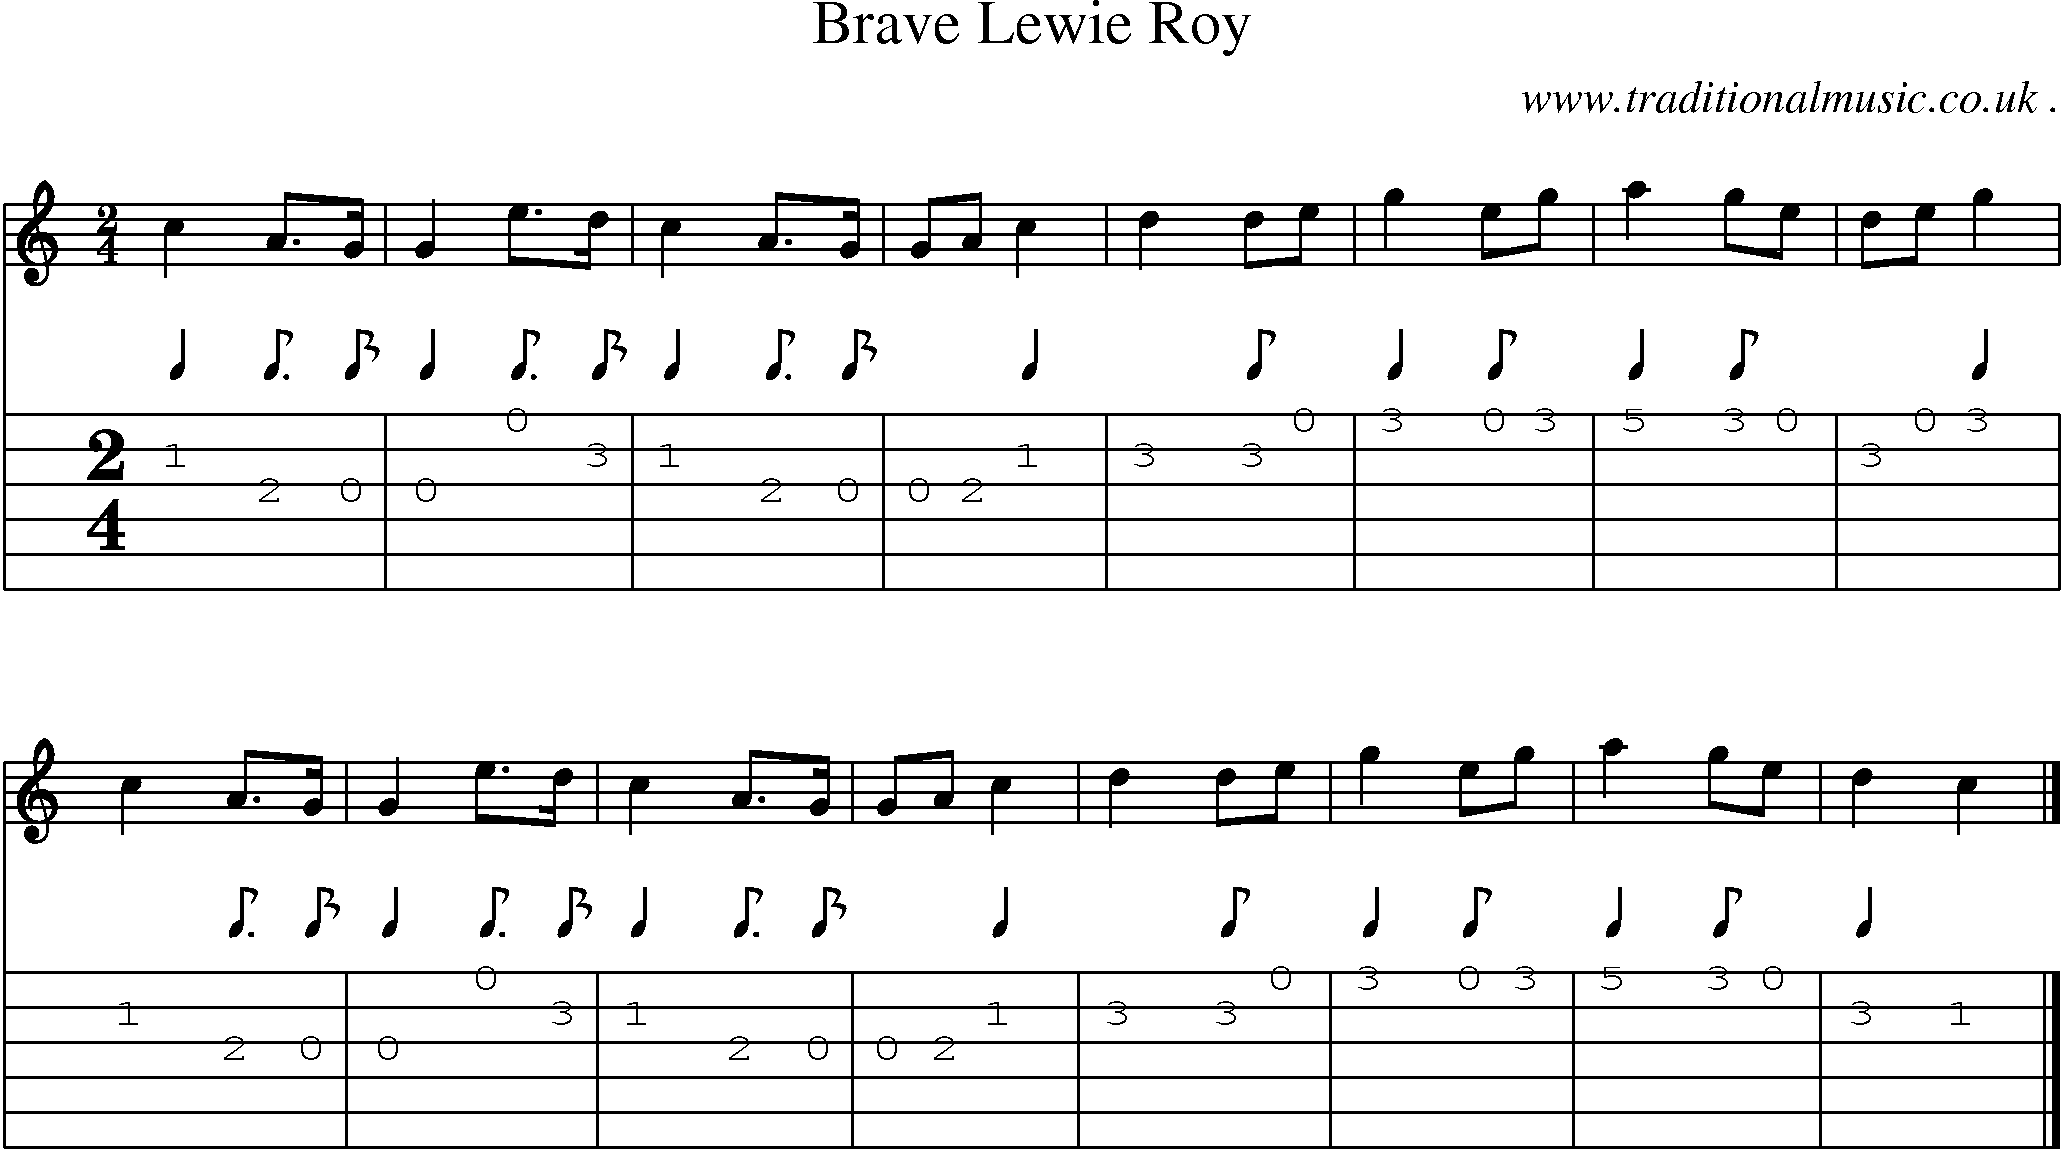 Sheet-music  score, Chords and Guitar Tabs for Brave Lewie Roy